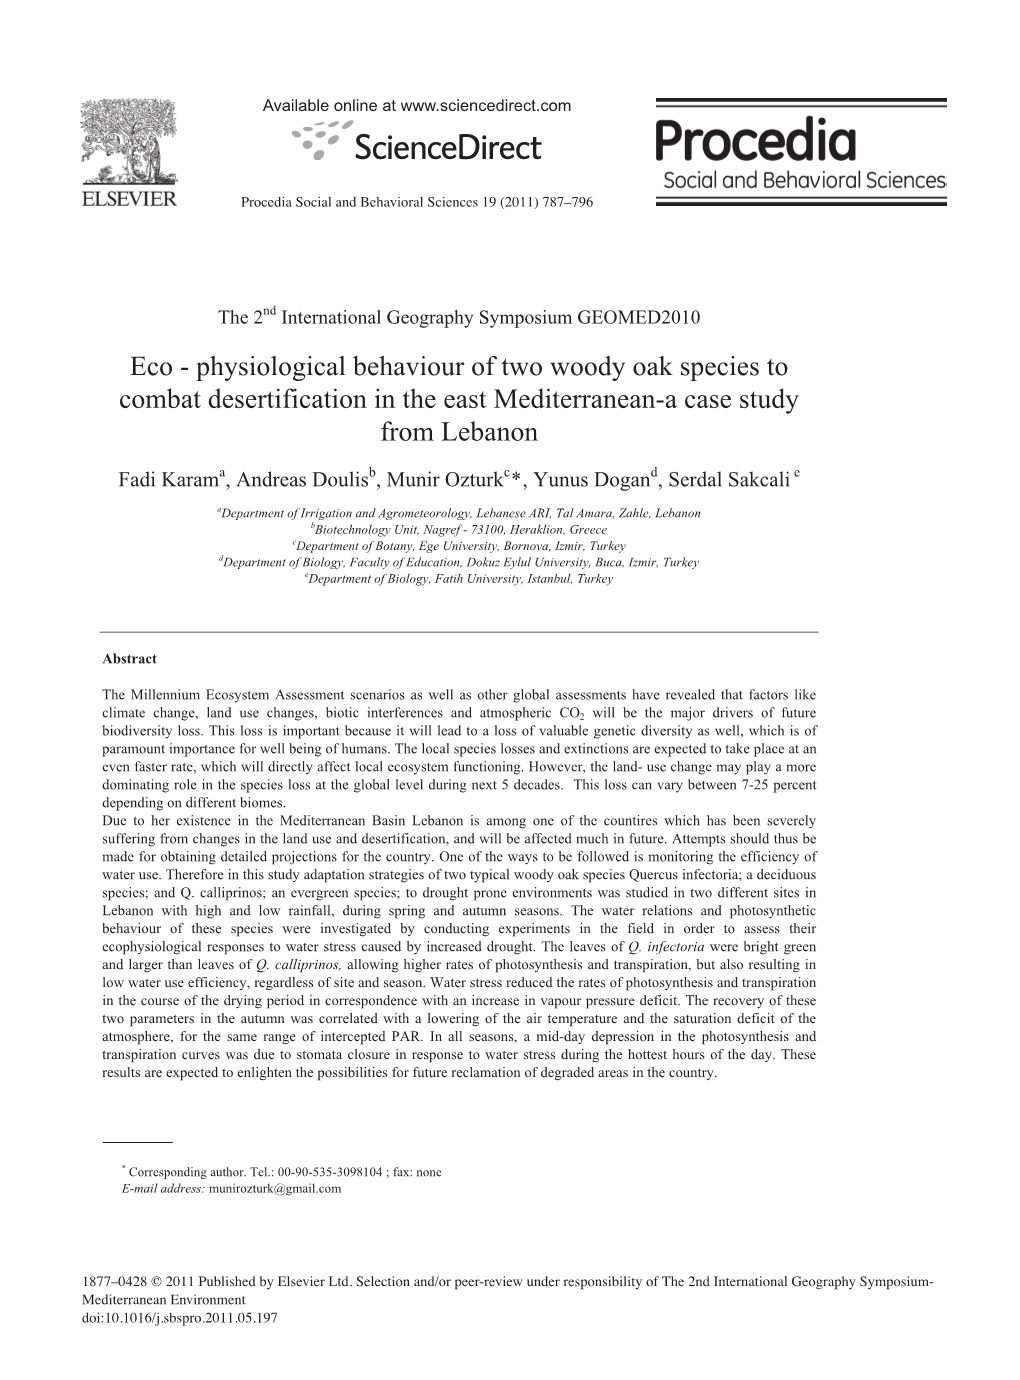 Eco-Physiological Behaviour of Two Woody Oak Species in Lebanon